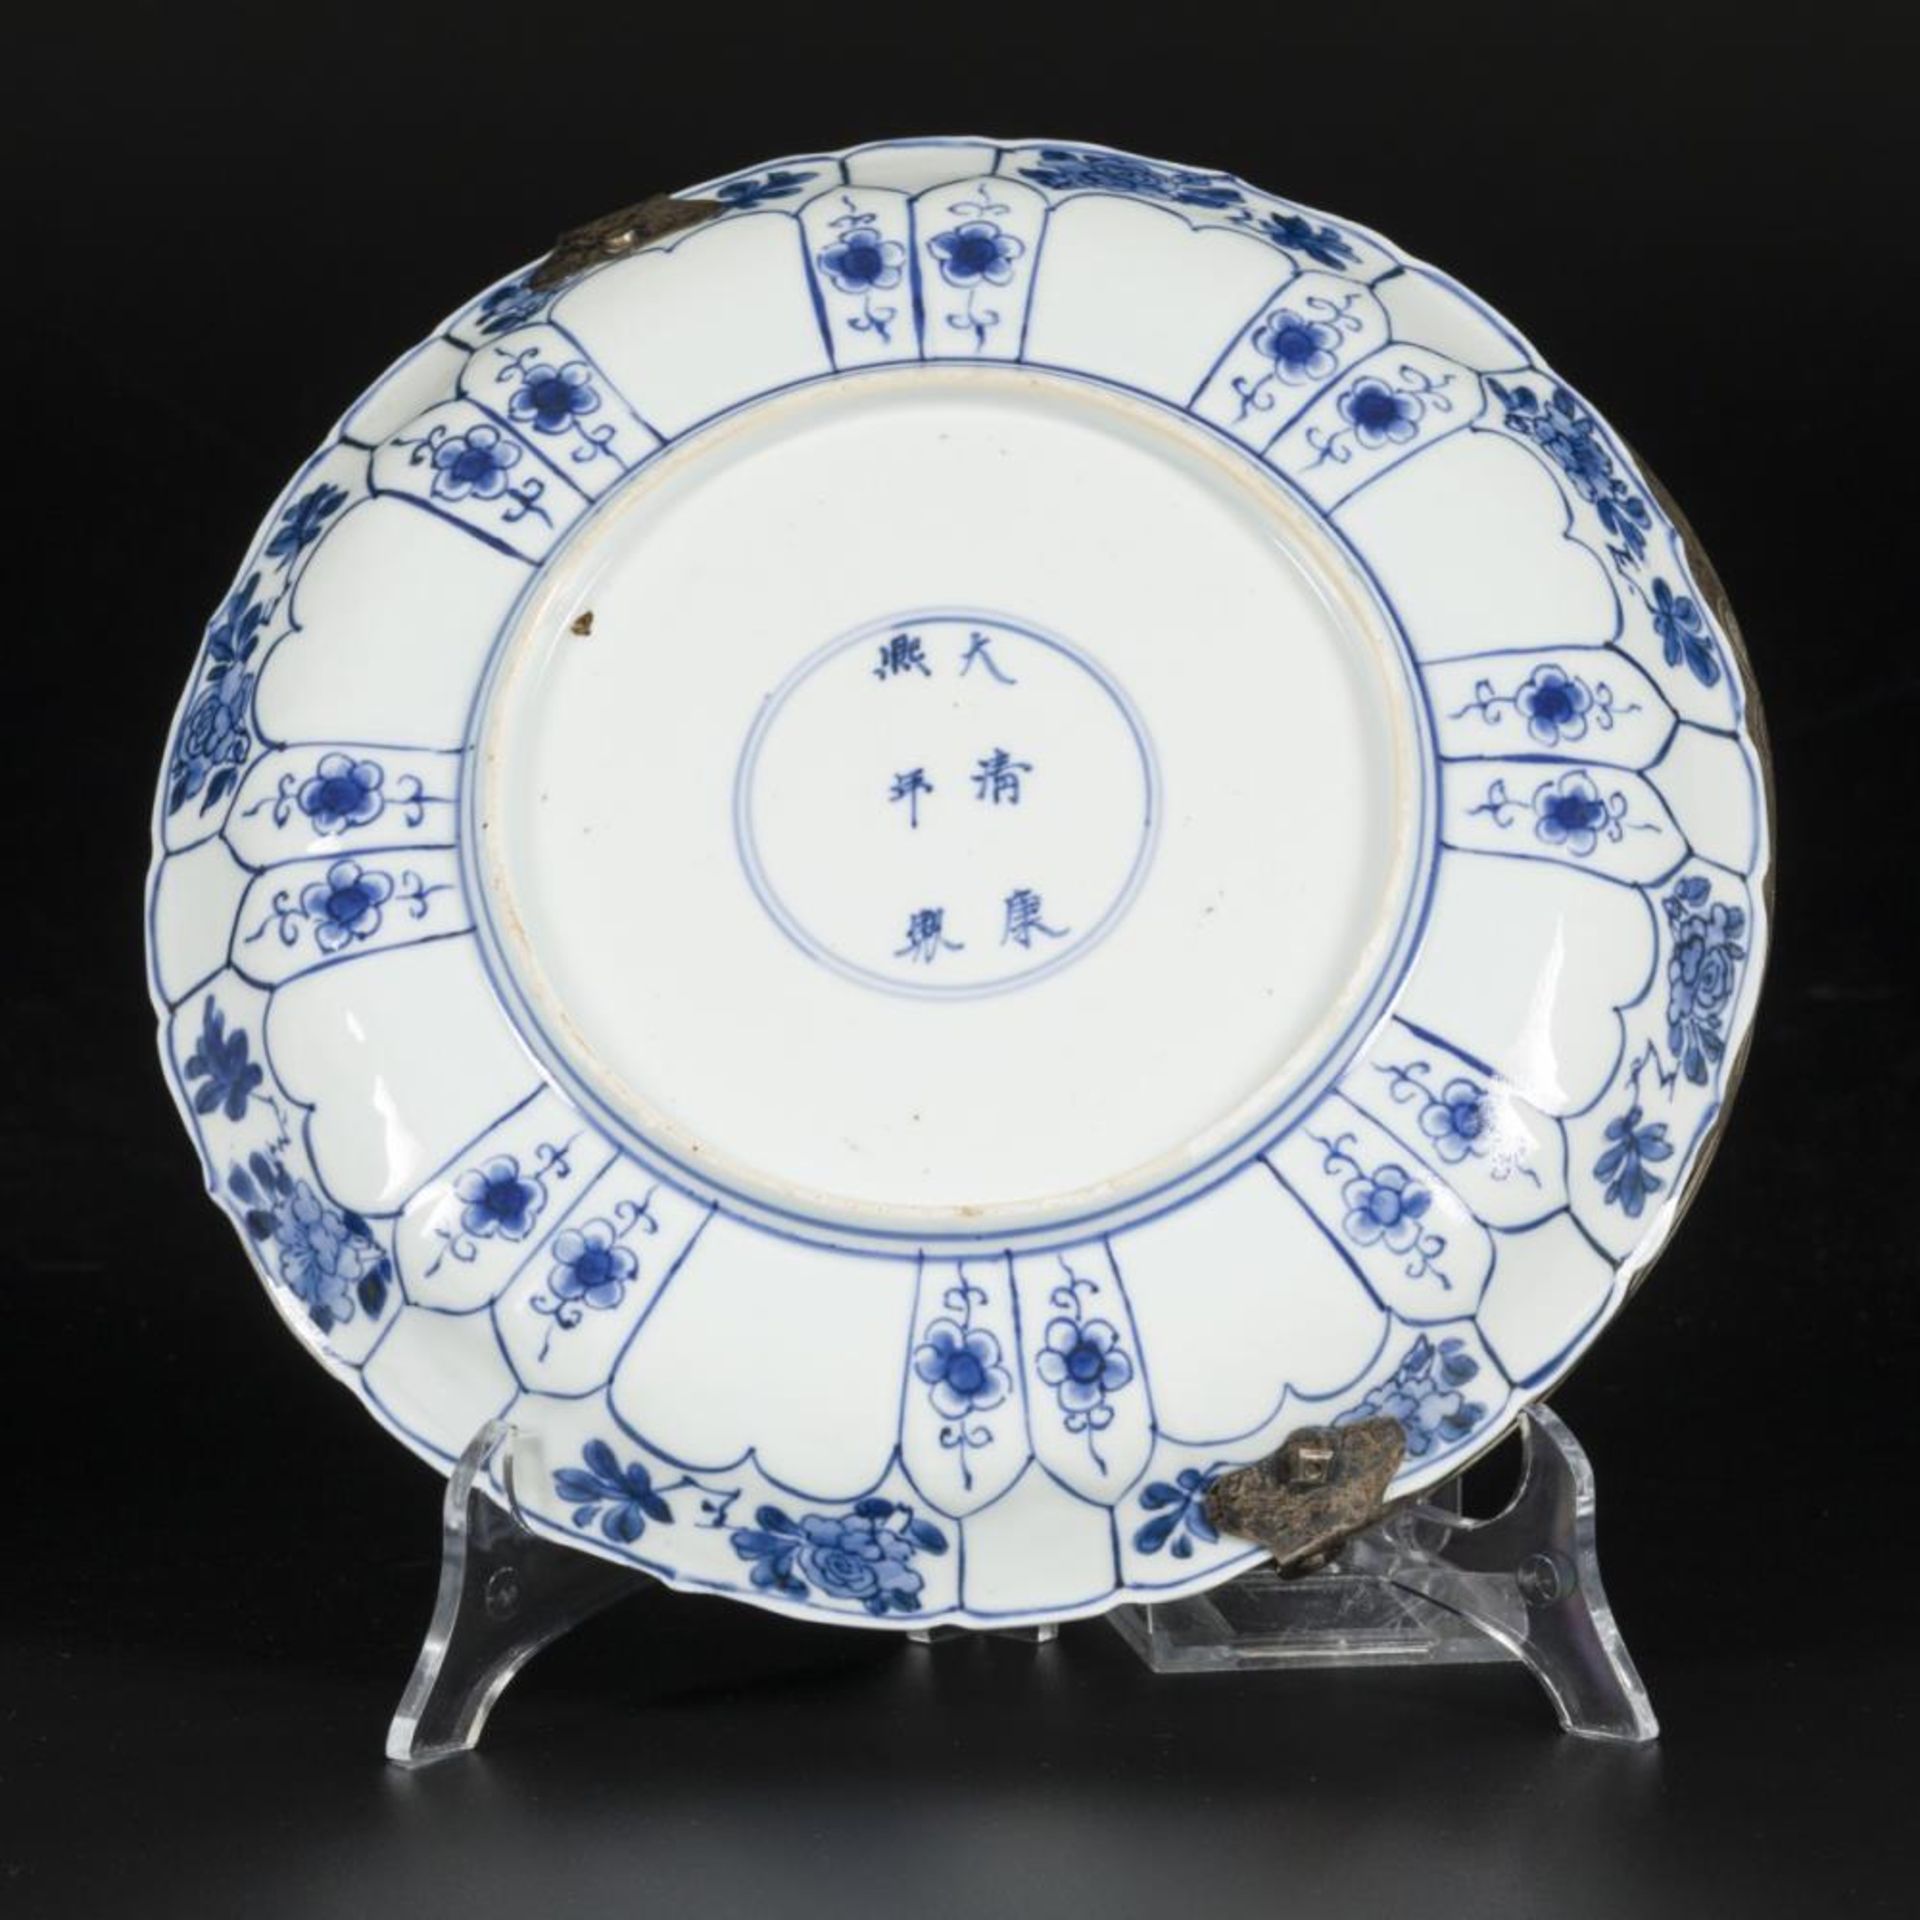 A porcelain charger with floral decoration, marked in period China, Kangxi. - Image 3 of 3